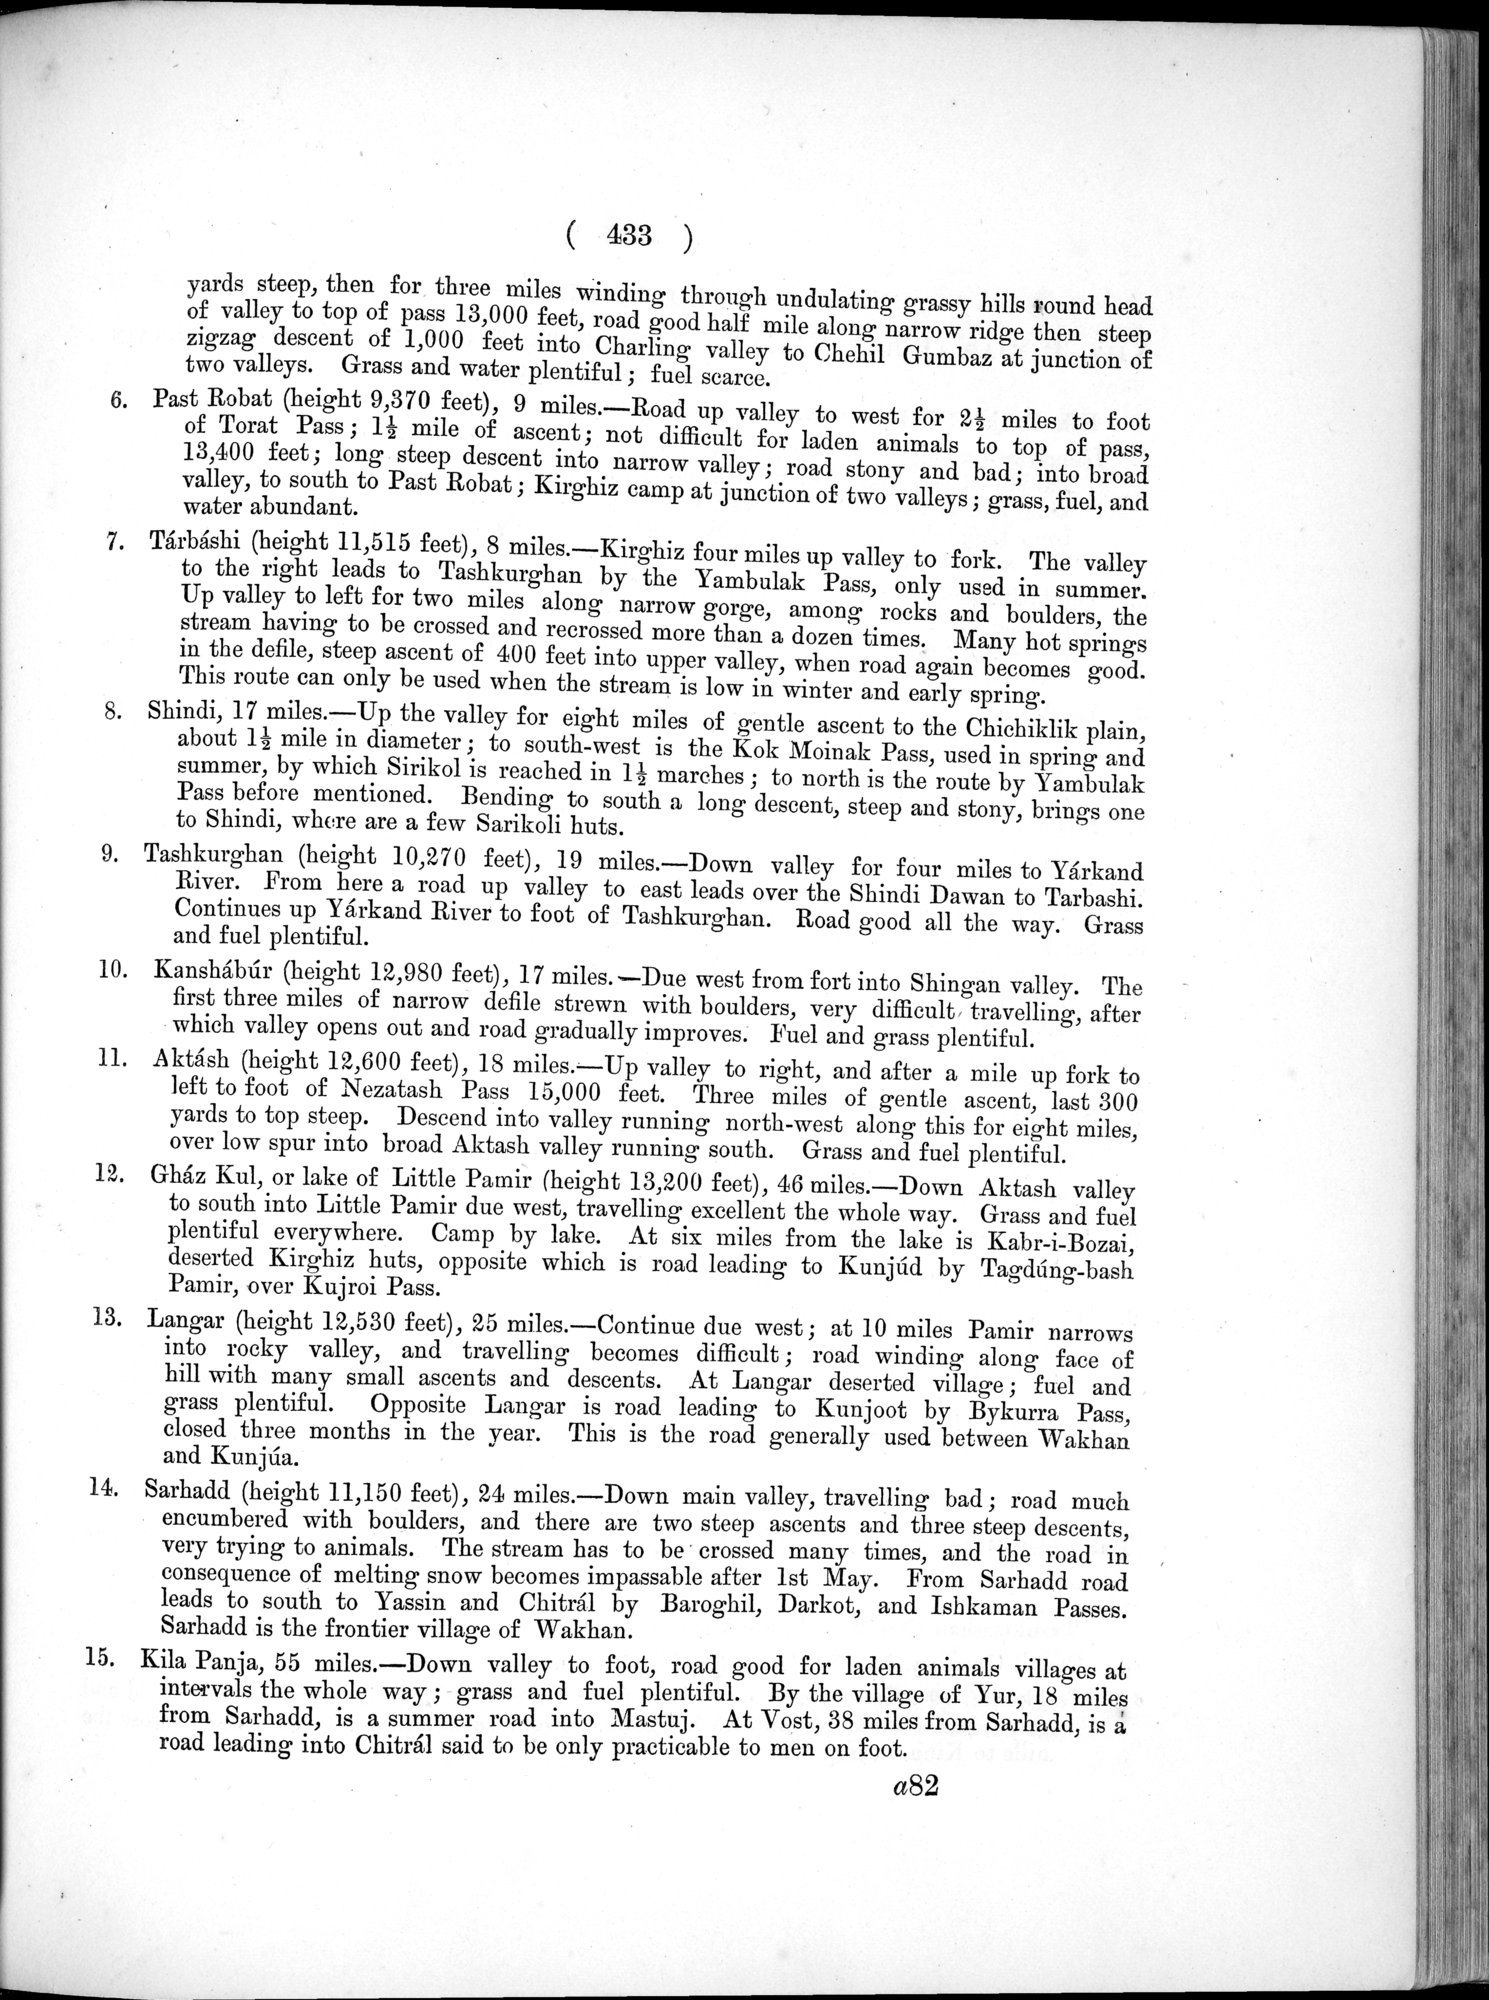 Report of a Mission to Yarkund in 1873 : vol.1 / Page 567 (Grayscale High Resolution Image)